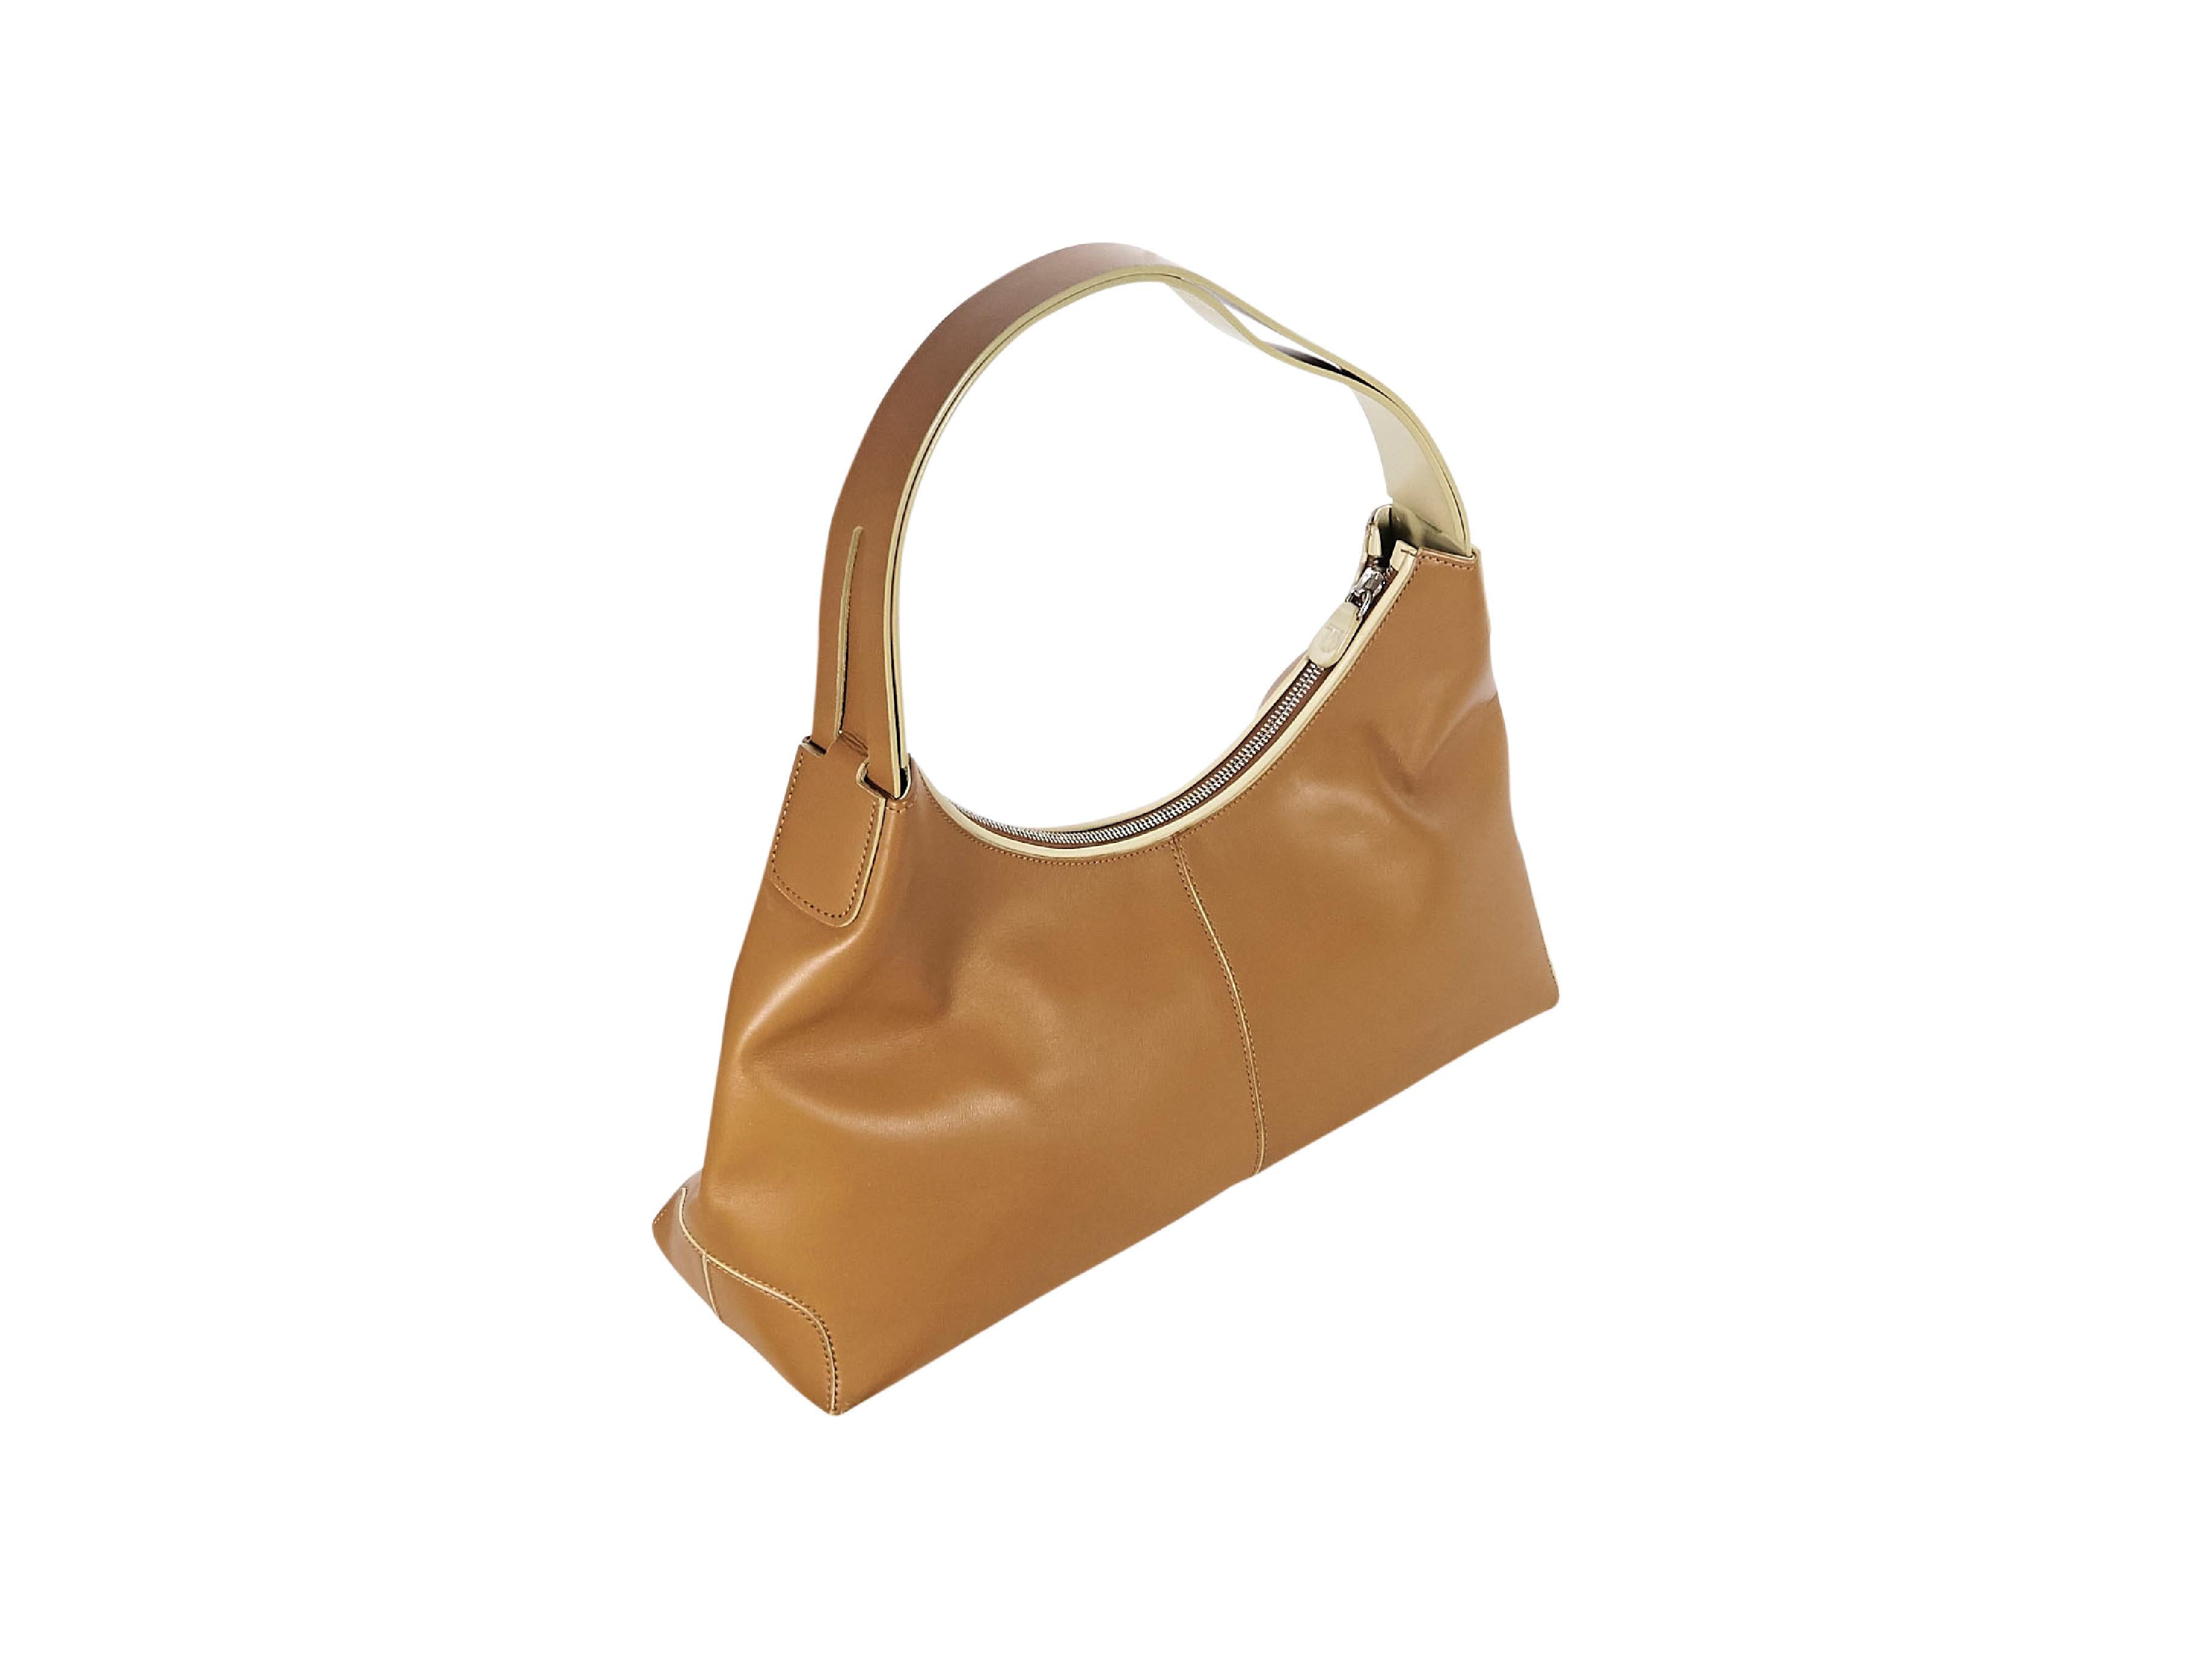 Product details:  Brown leather shoulder bag by Tod's.  Single shoulder strap.  Top zip closure.  Lined interior with inner zip pocket.  Silvertone hardware.  15